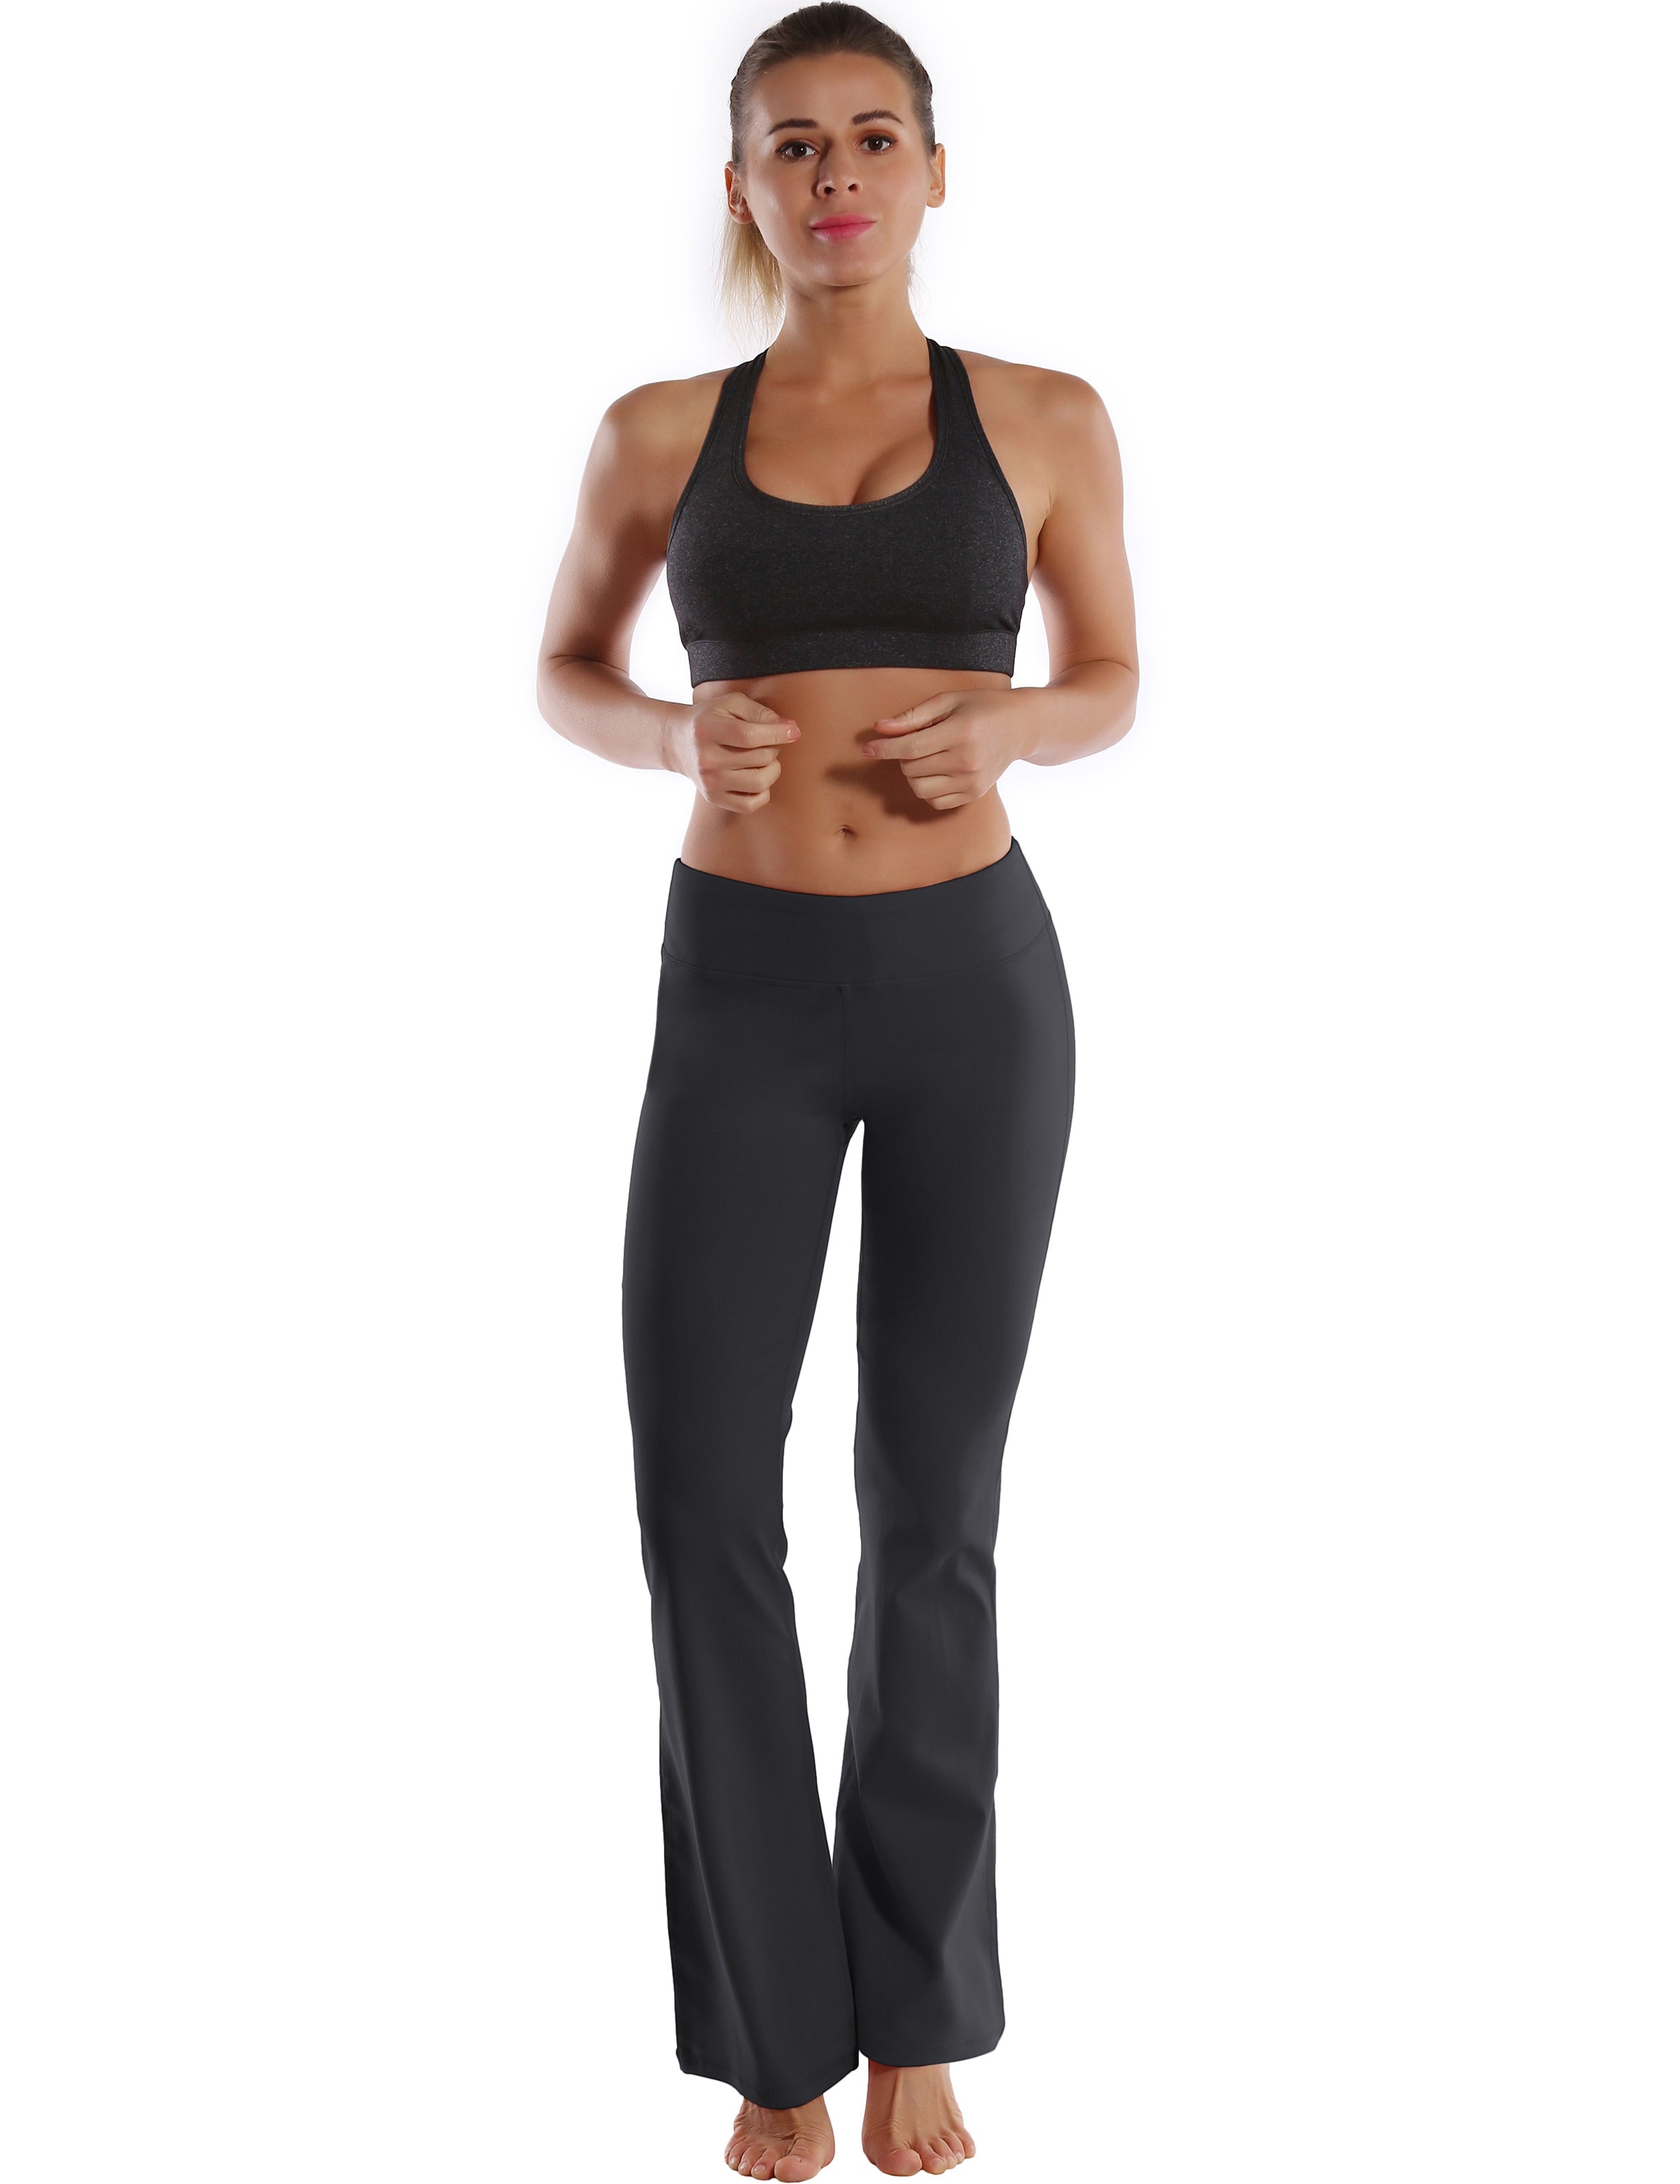 Back Pockets Bootcut Leggings shadowcharcoal 87%Nylon/13%Spandex Fabric doesn't attract lint easily 4-way stretch No see-through Moisture-wicking Inner pocket Four lengths